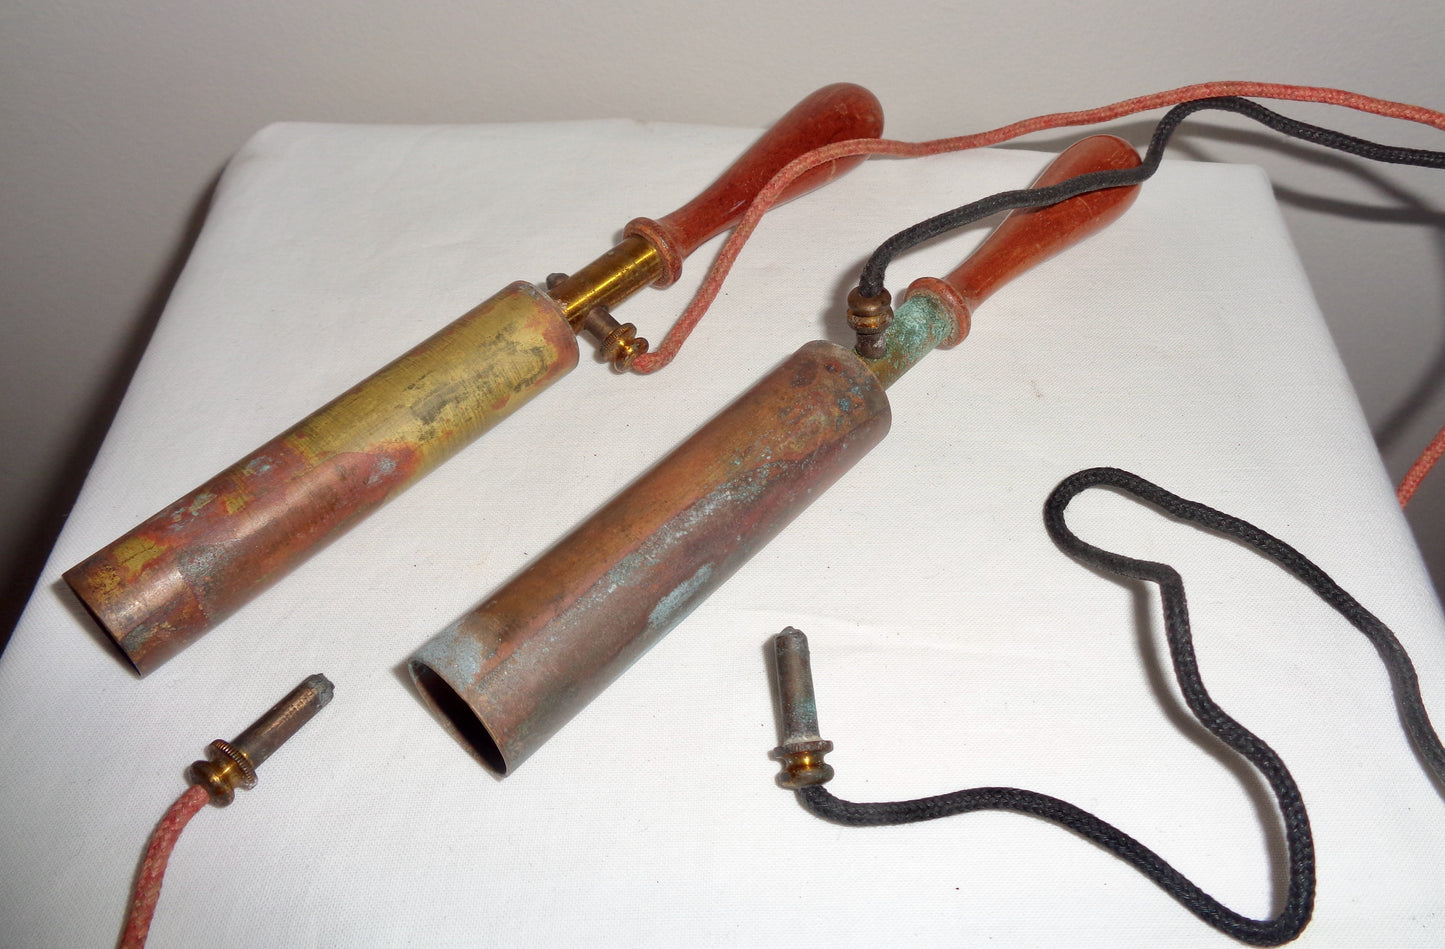 Antique Shock Therapy Quack Medical Device